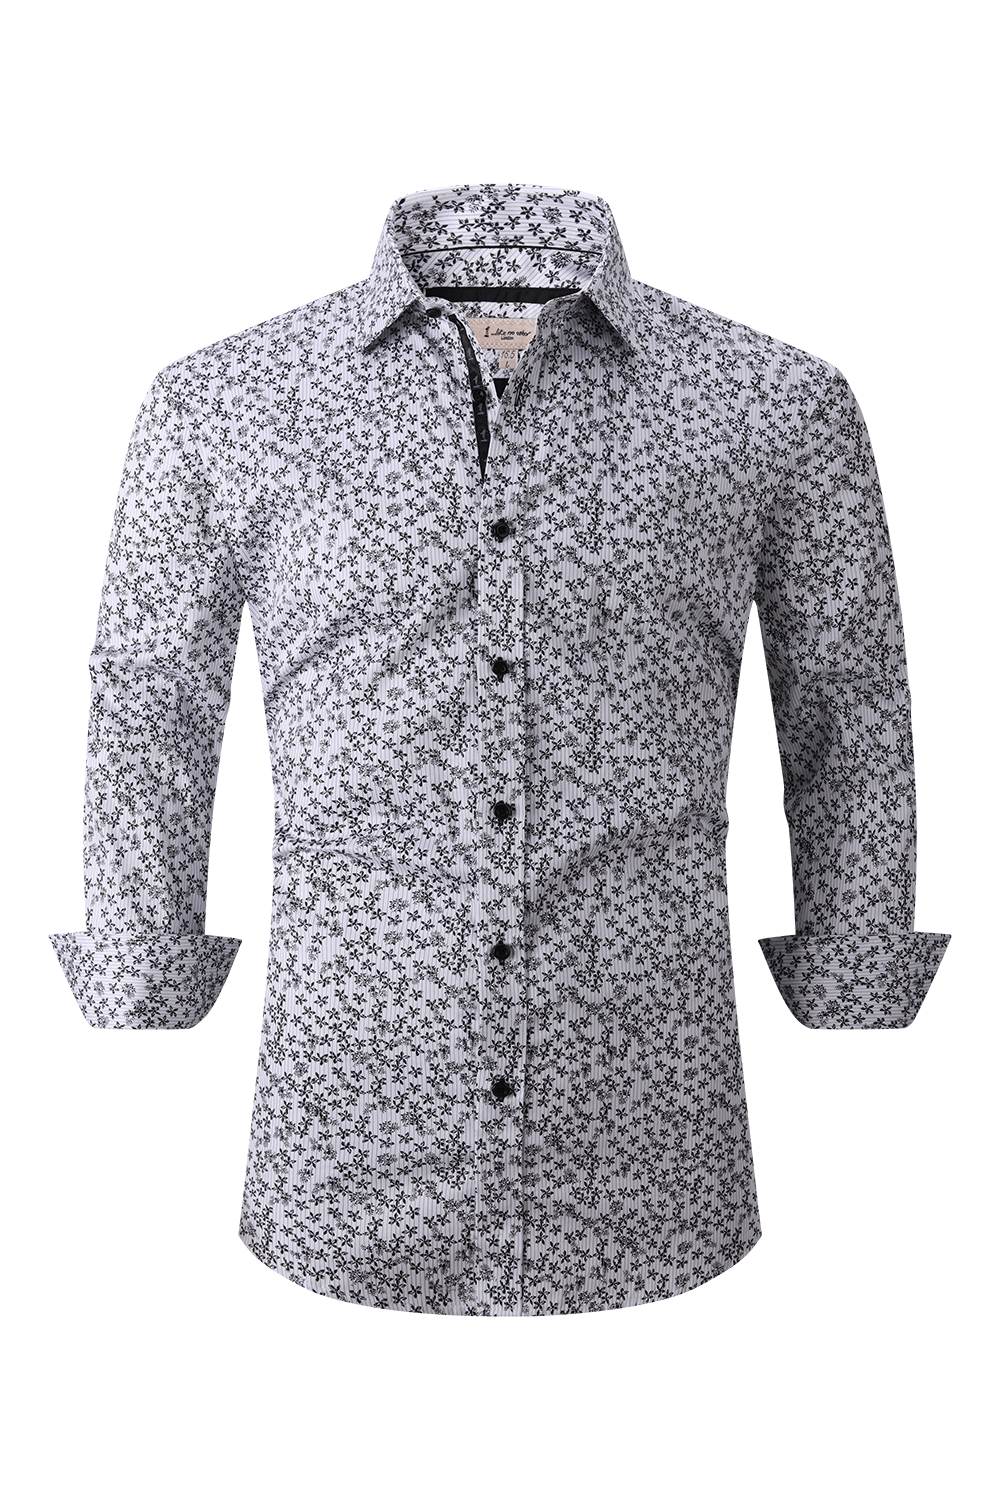 1 Like No Other Floral Dress Shirt